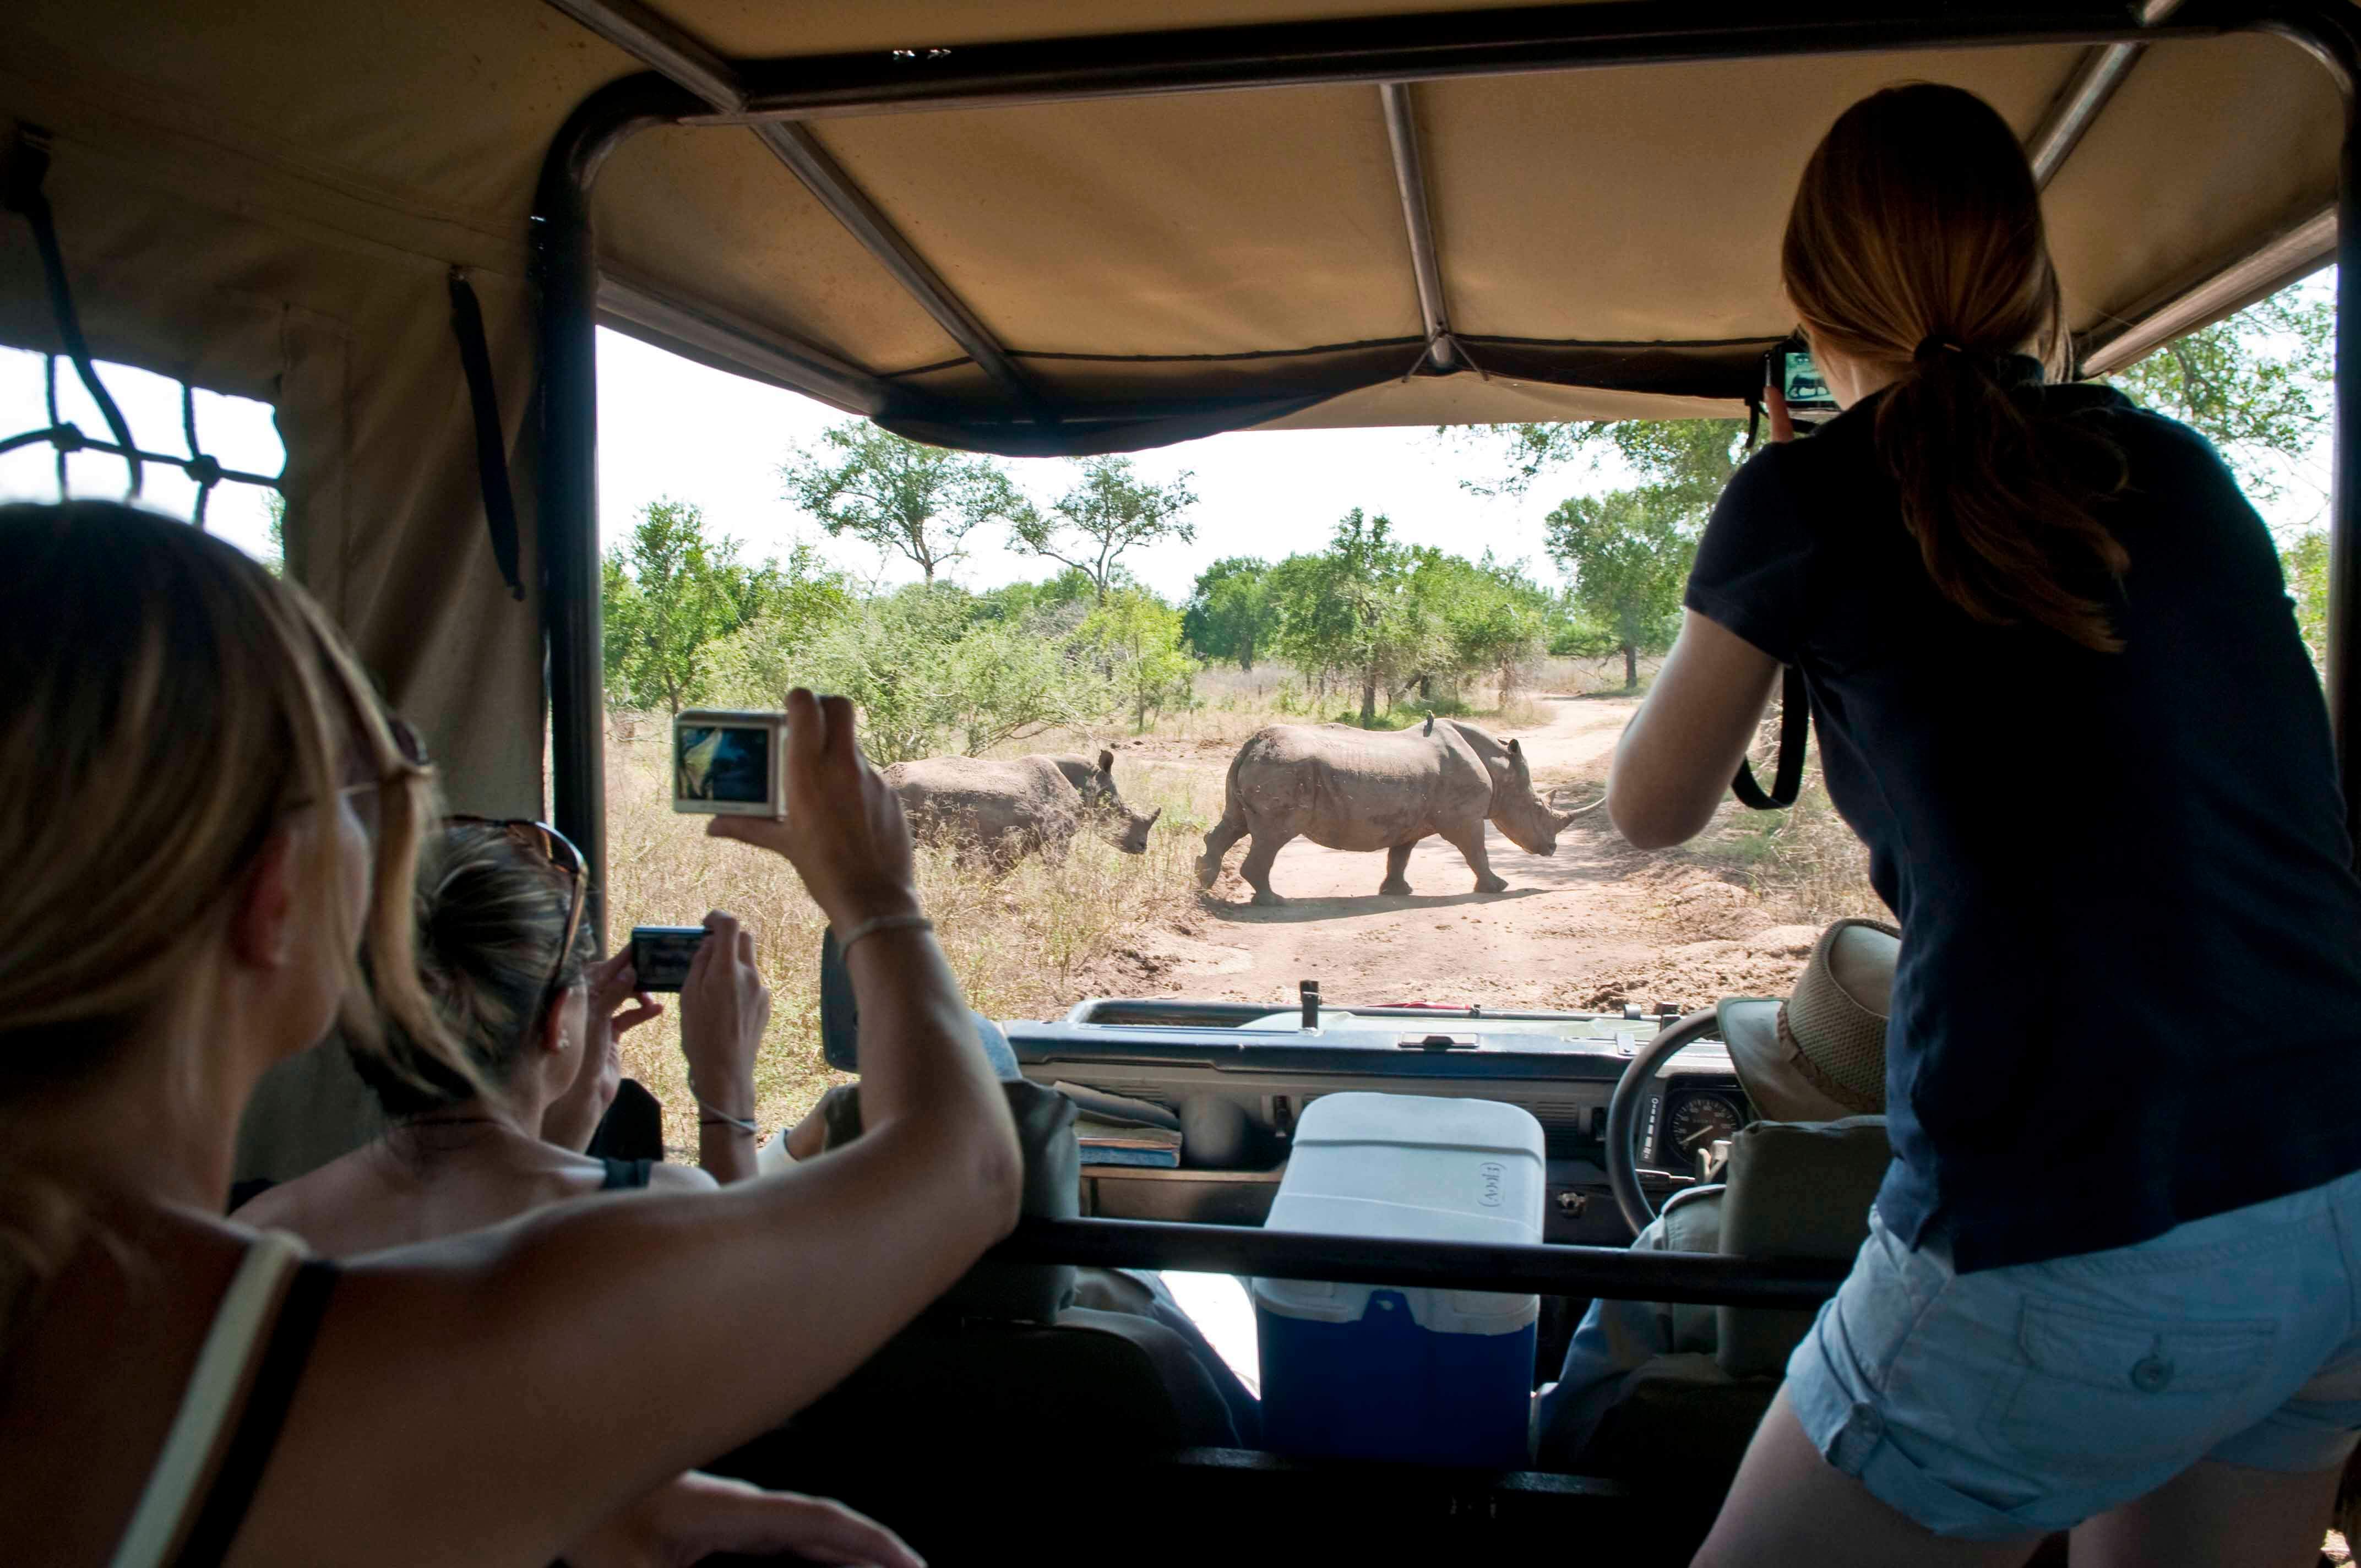 When is the Best Time to go on an African Safari?